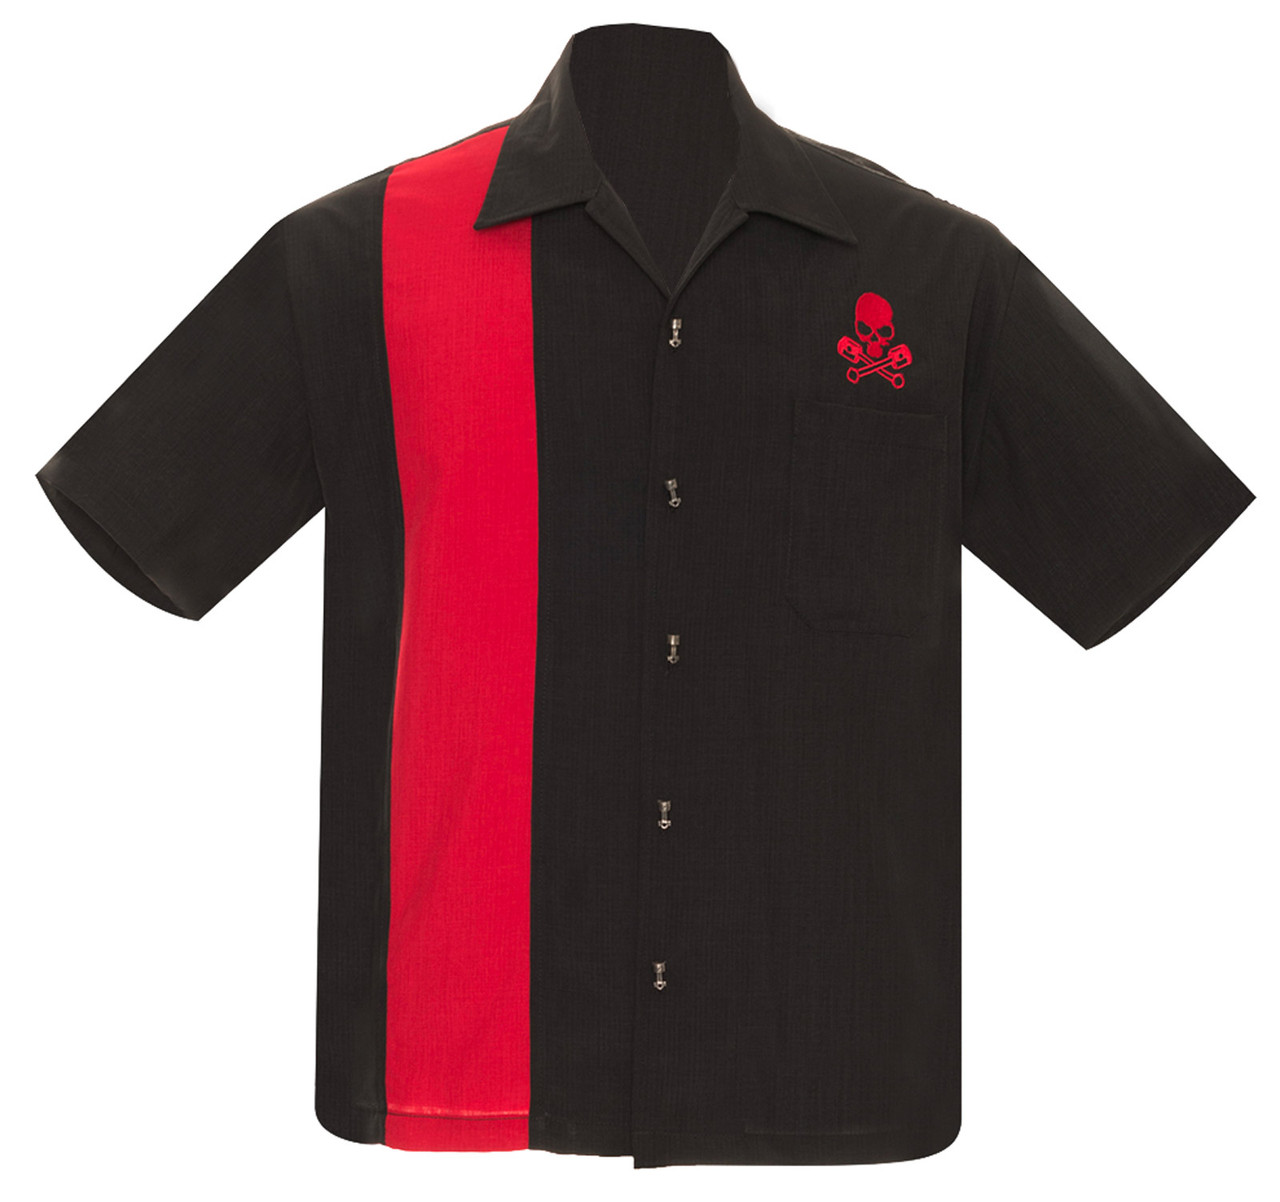 Steady Clothing Skull Piston Button Up Bowling Shirt Black Red ...